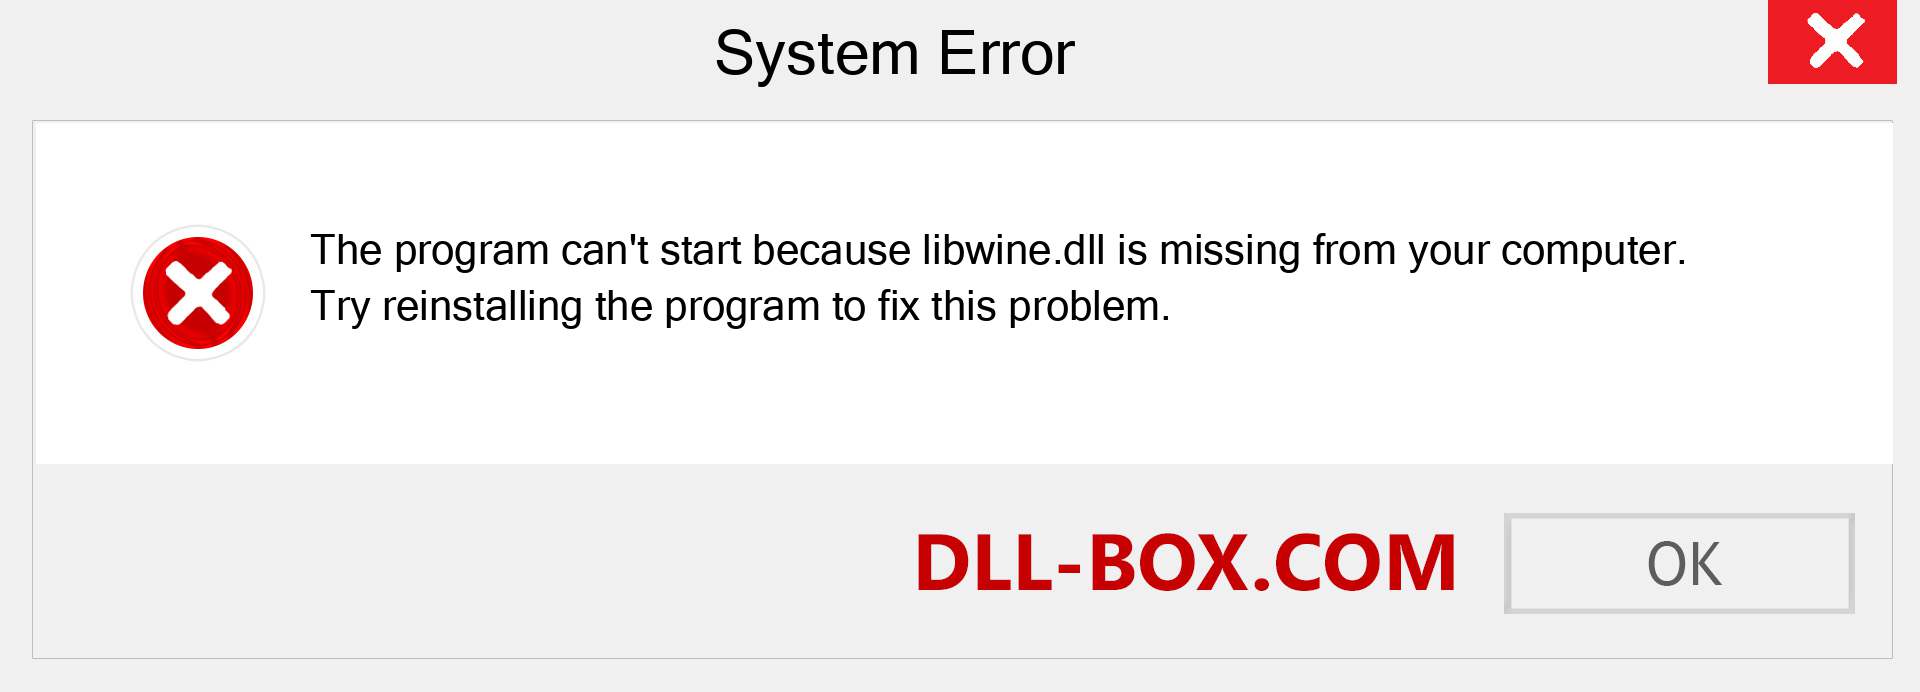  libwine.dll file is missing?. Download for Windows 7, 8, 10 - Fix  libwine dll Missing Error on Windows, photos, images